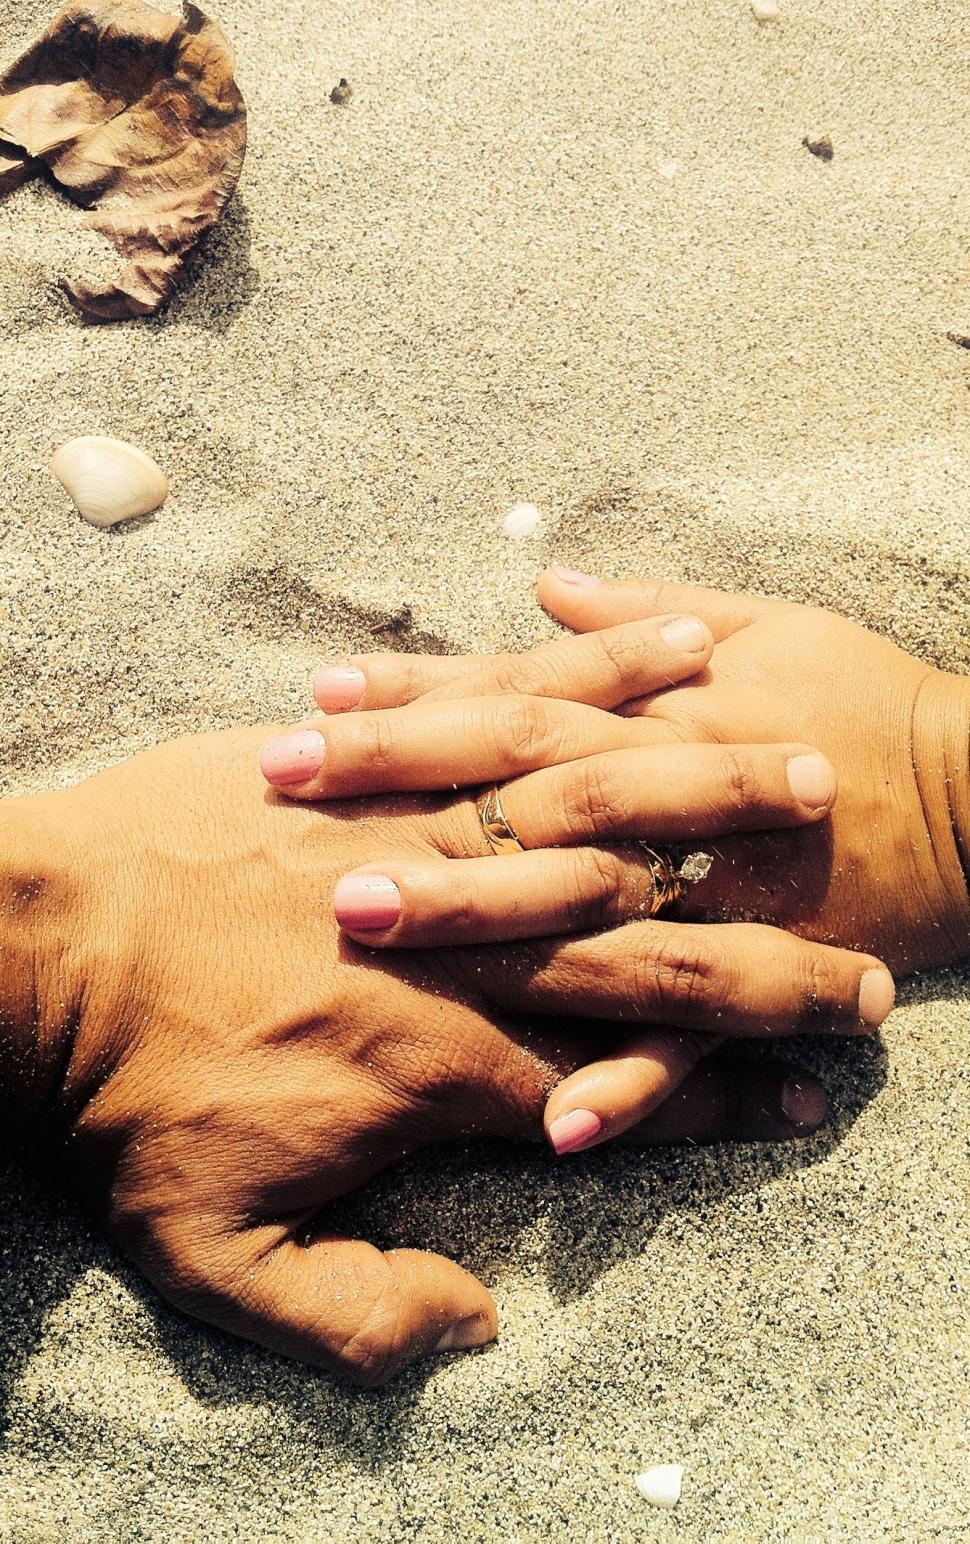 Free Image of Hands Holding Each Other in the Sand 